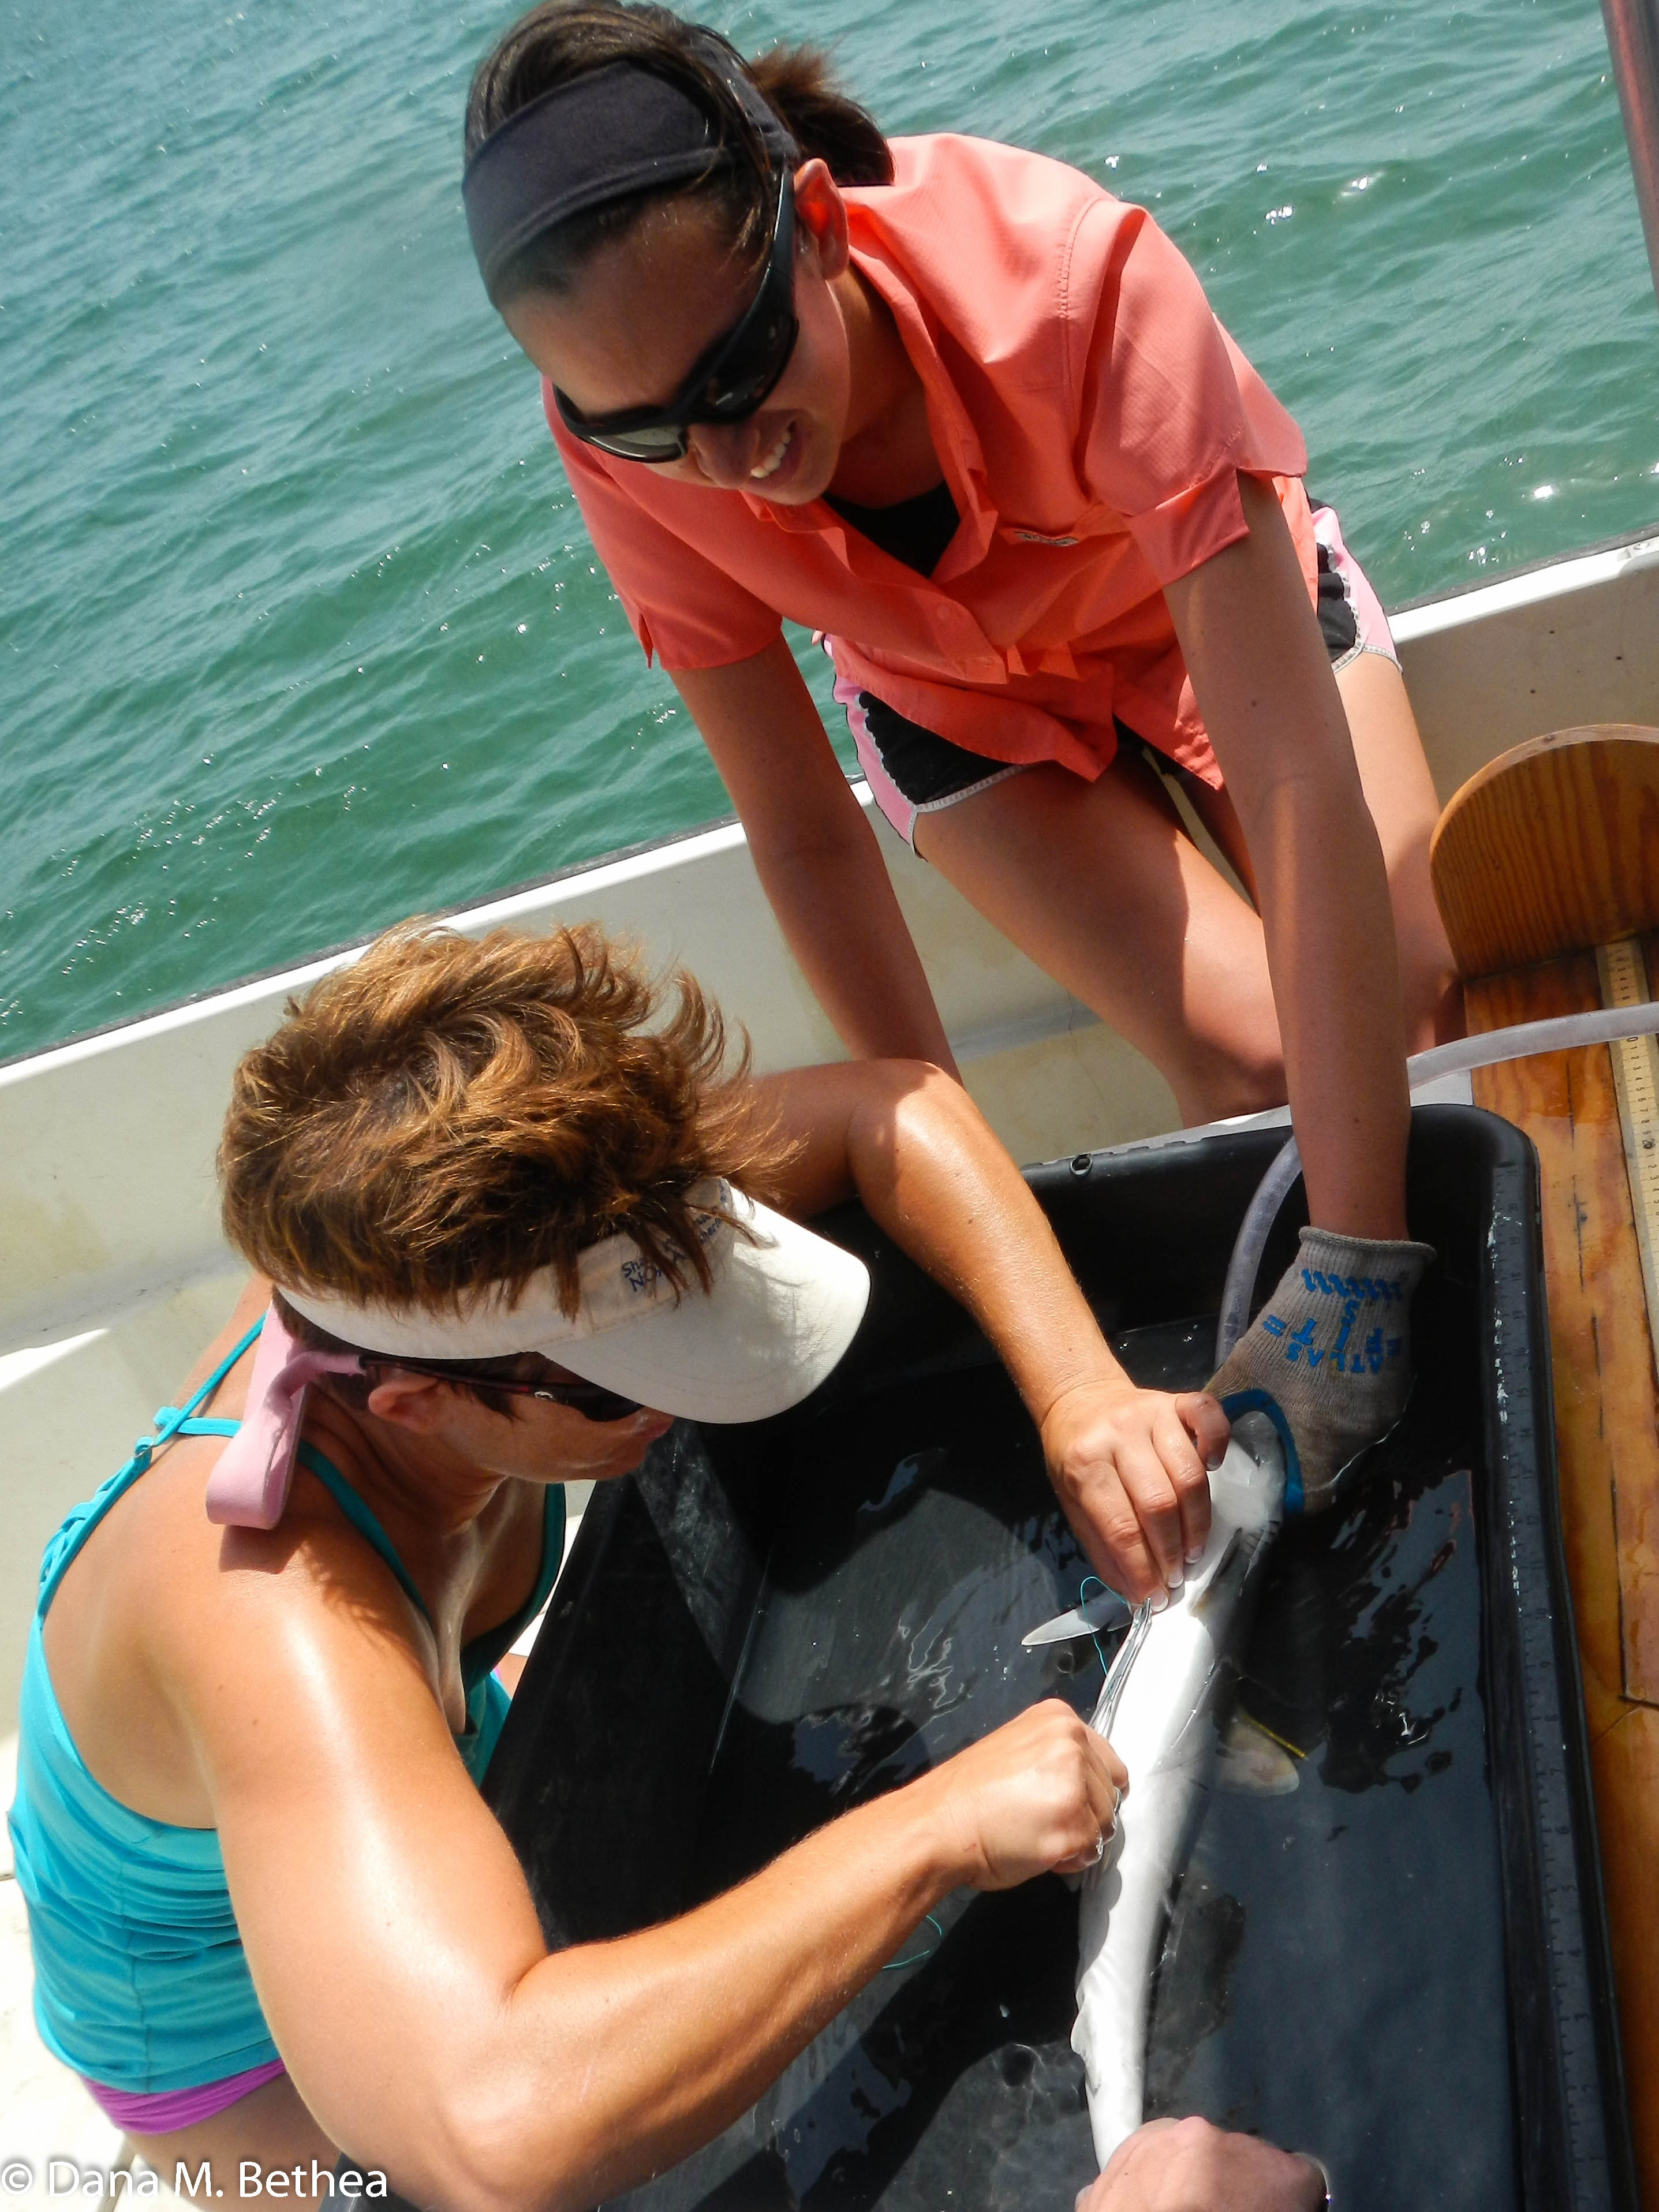 Kat Mowle, NOAA Hollings Scholar Class of 2013, assists one of her mentors, Dana Bethea, as she inserts an acoustic tag into an Atlantic sharpnose shark. Kat spent her 2014 summer internship working with the Shark Population Assessment Group at the NOAA NMFS SEFSC lab in Panama City, Florida.